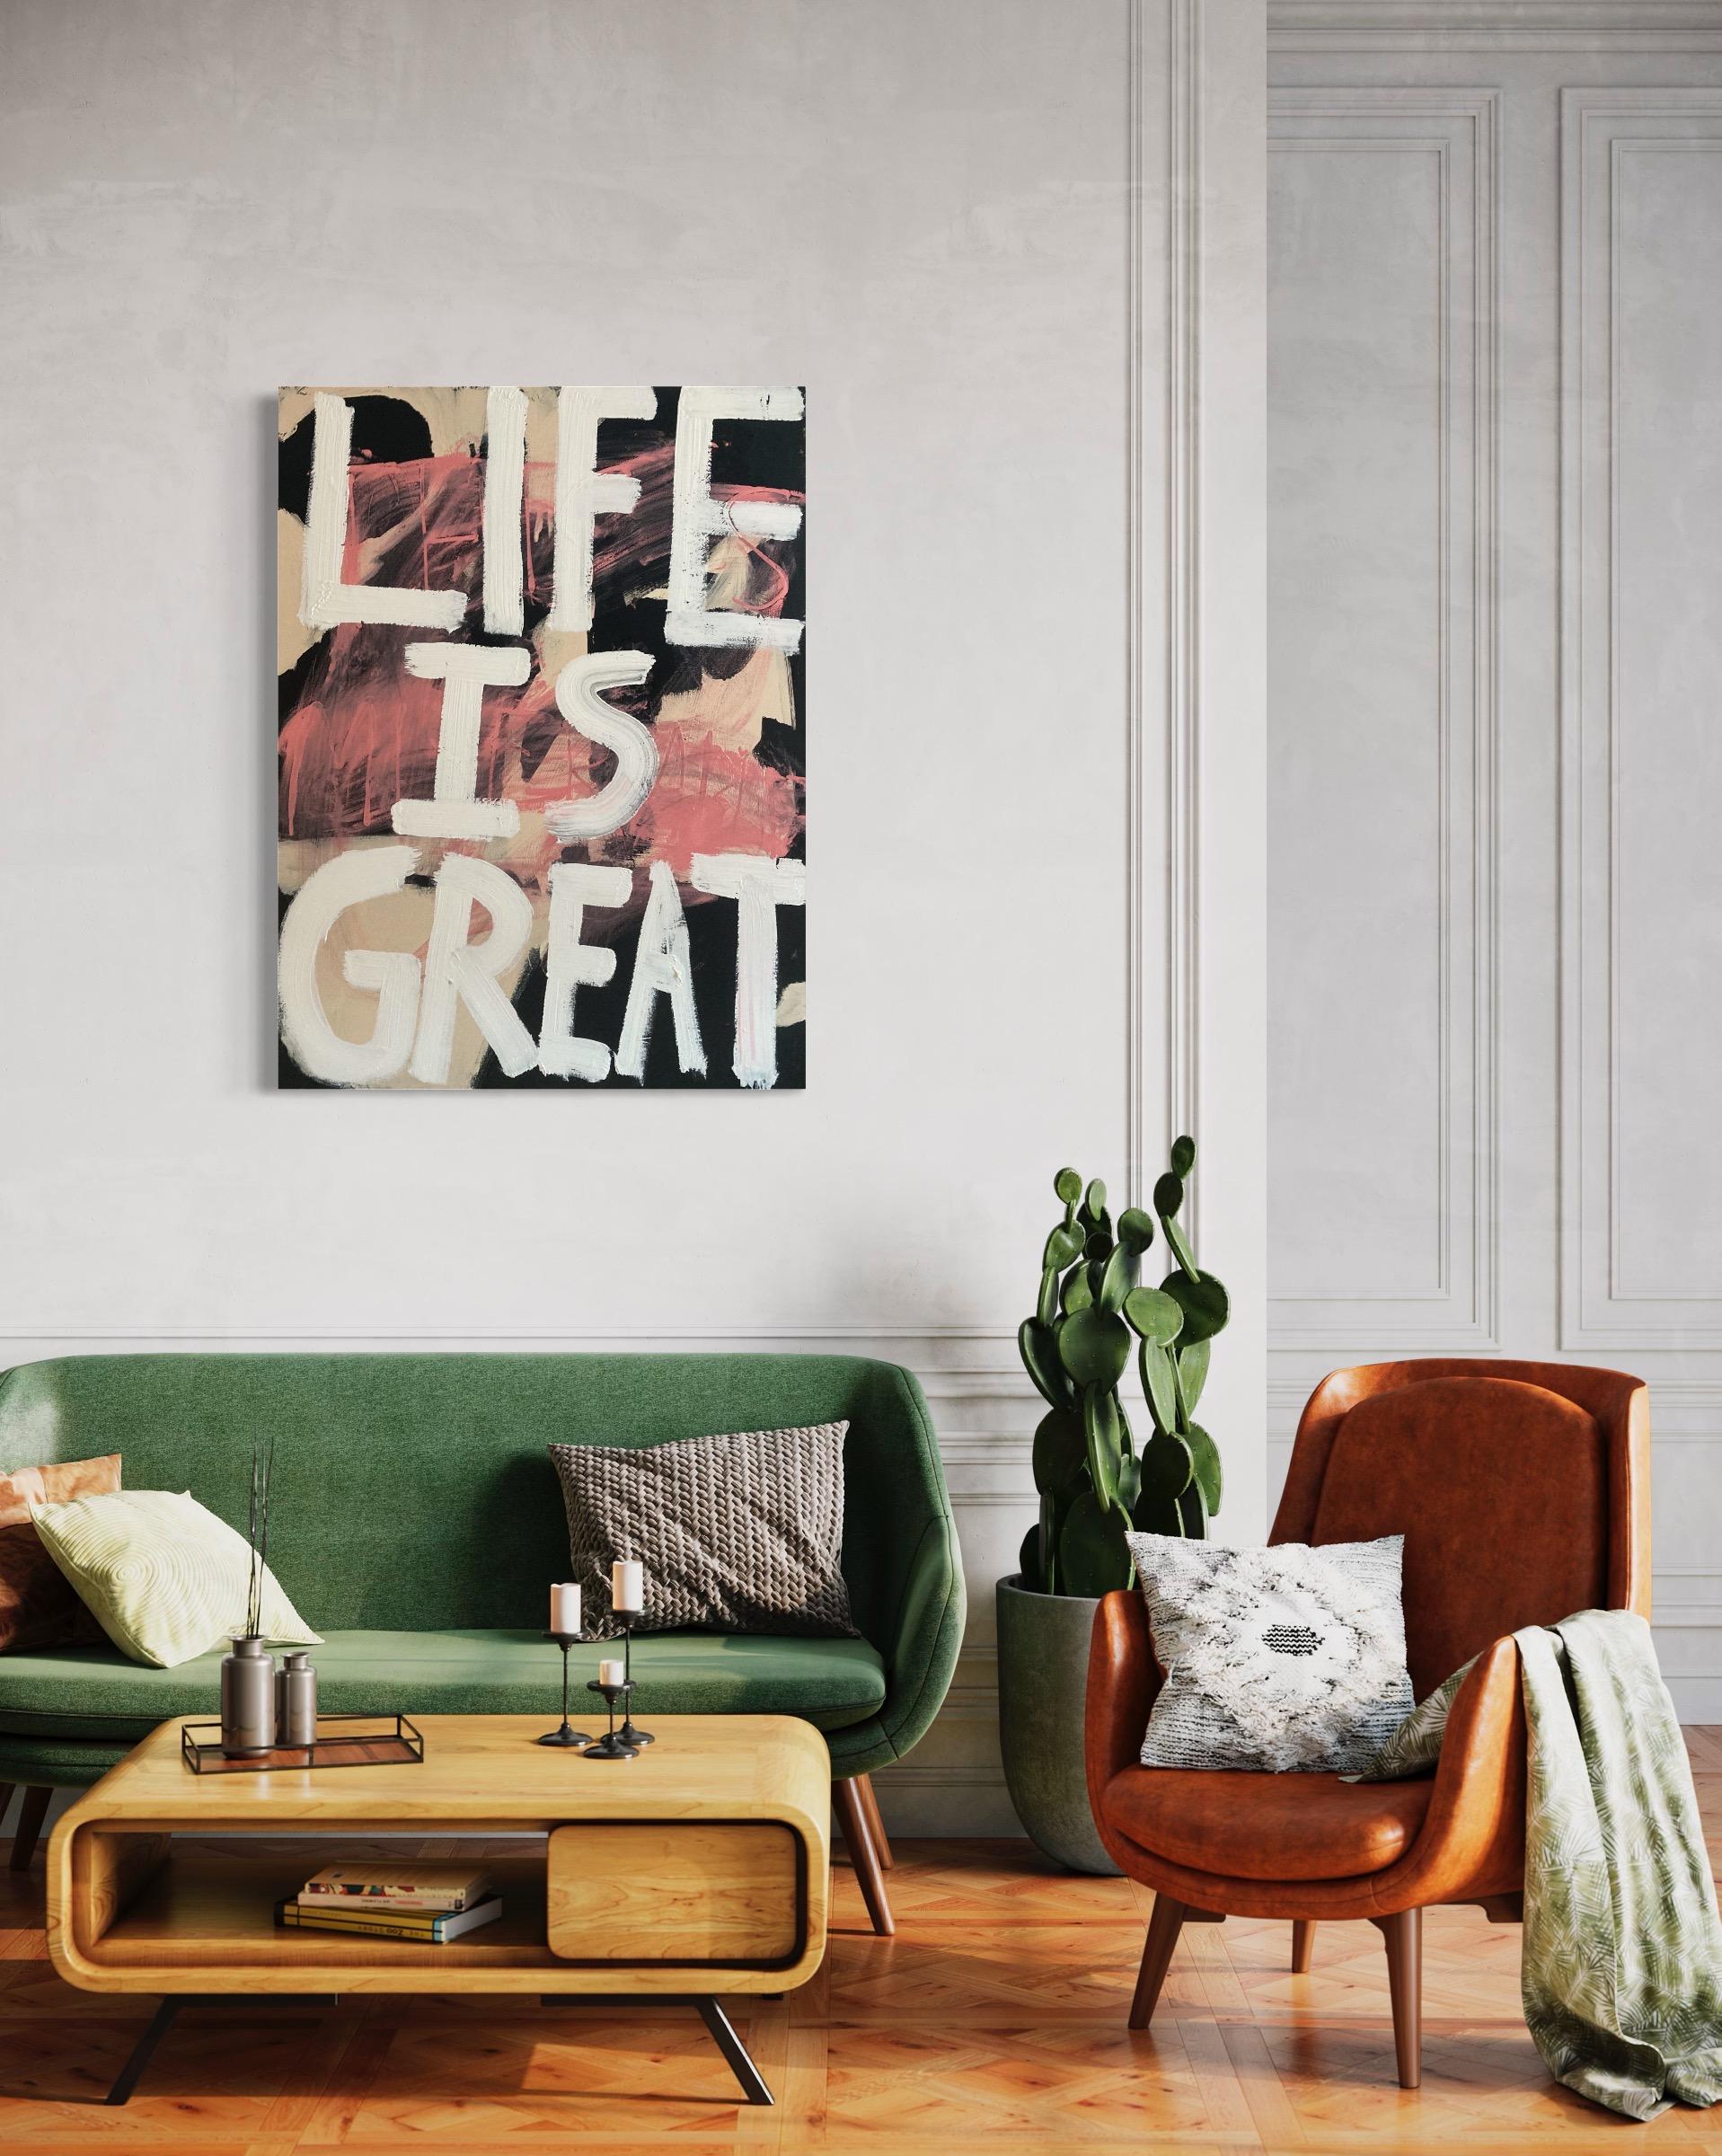 Life Is Great, Contemporary Text Painting by Matt Higgins 2